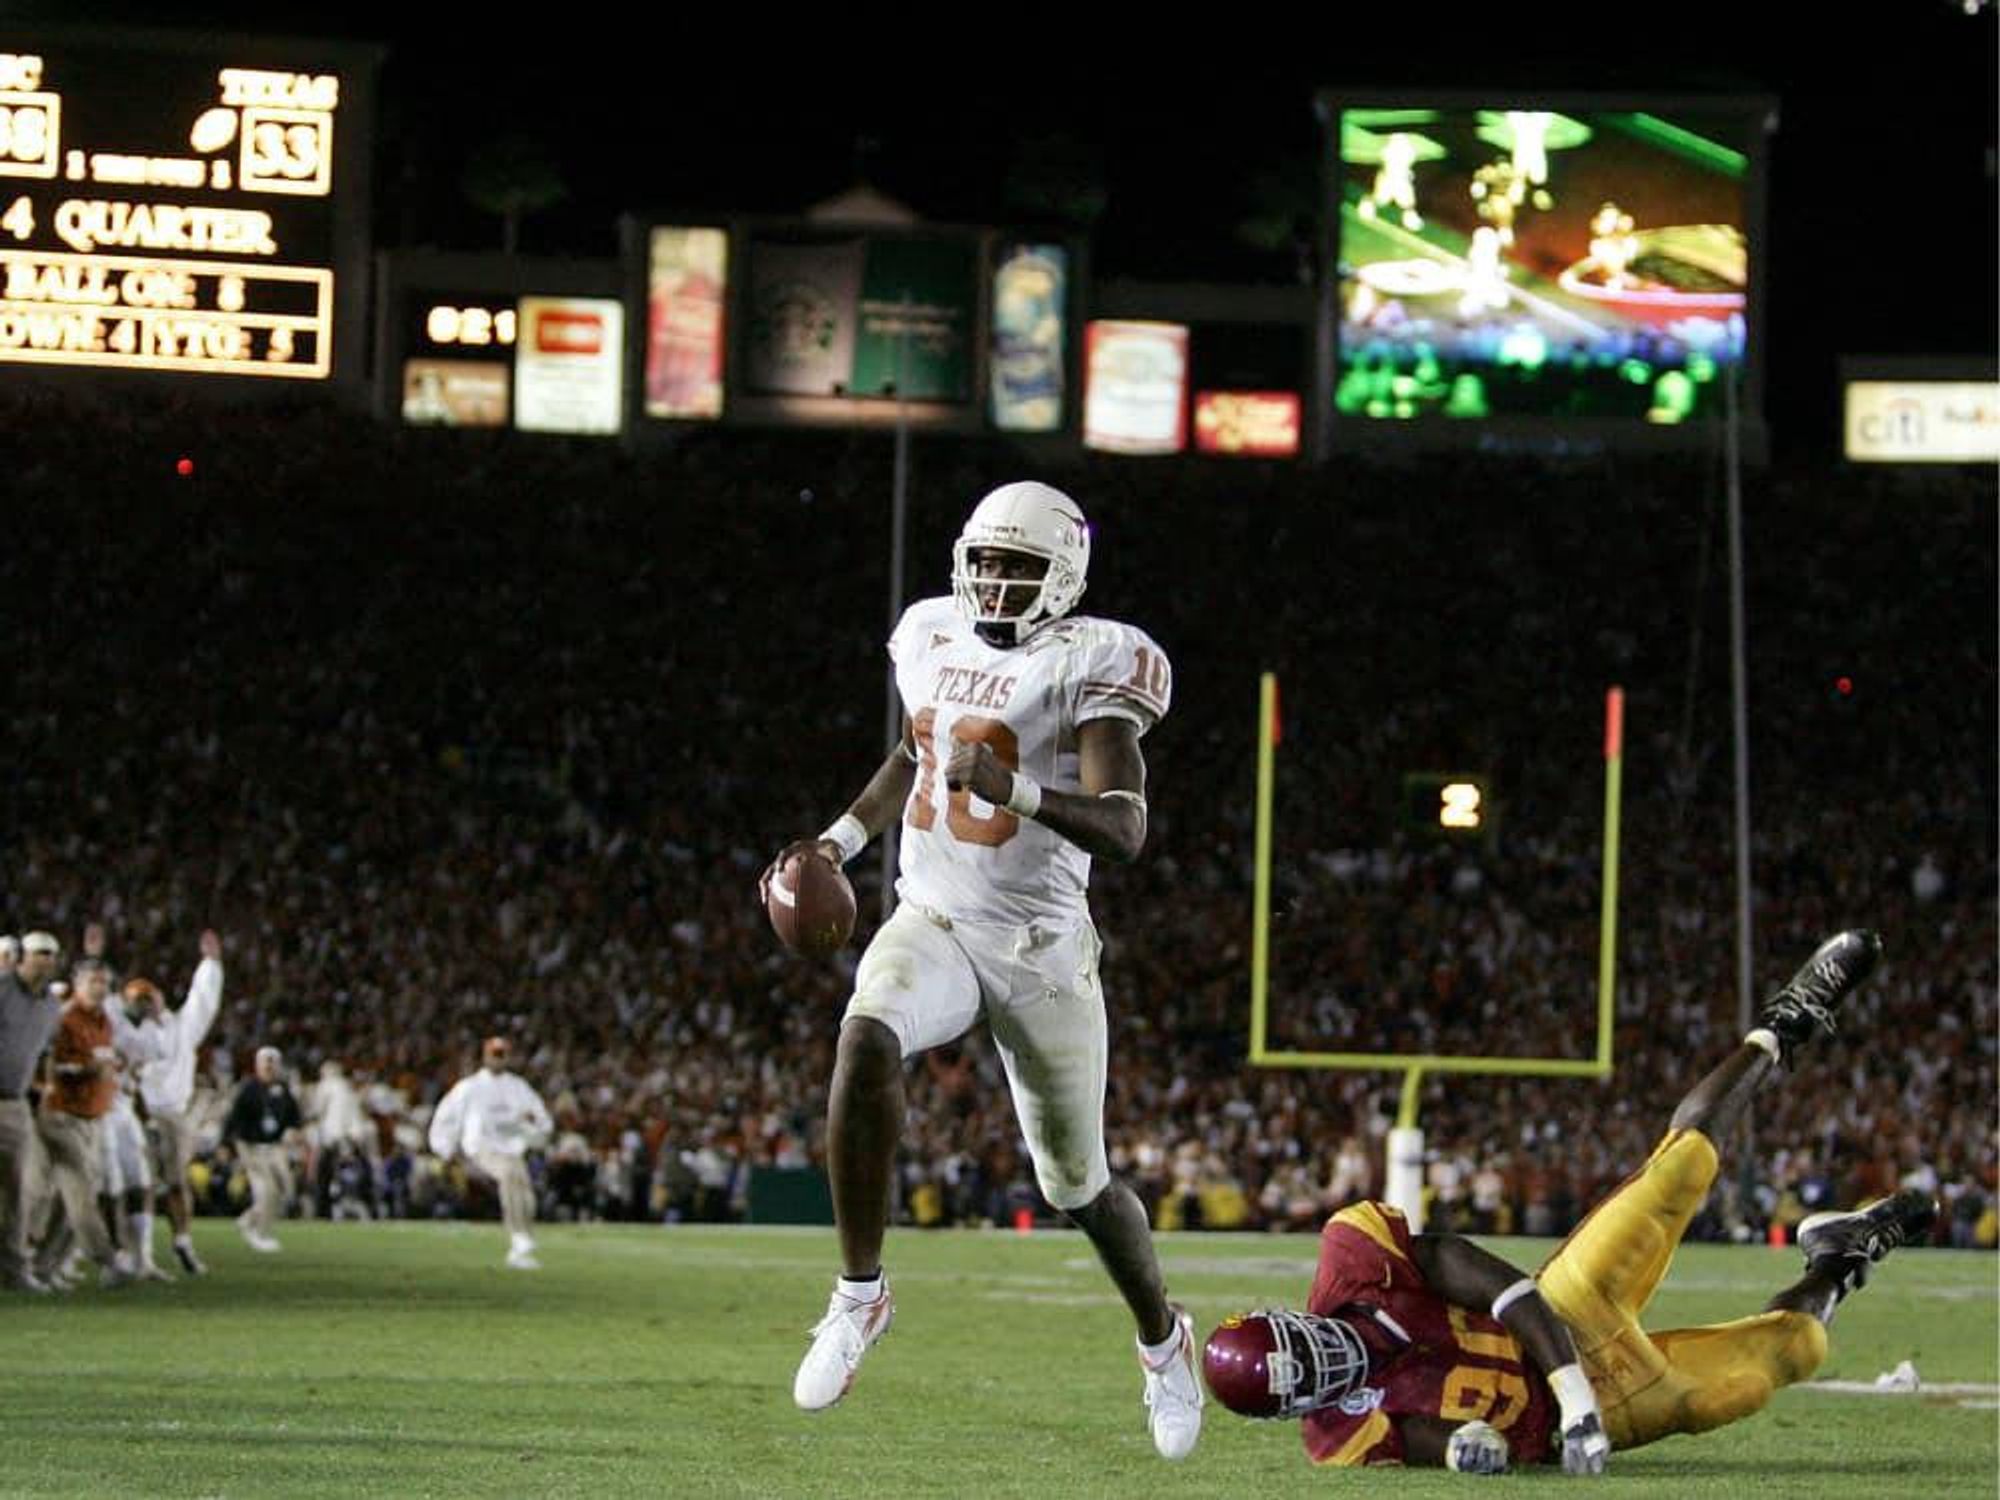 Vince Young scoring winning touchdown in 2006 National Championship Game